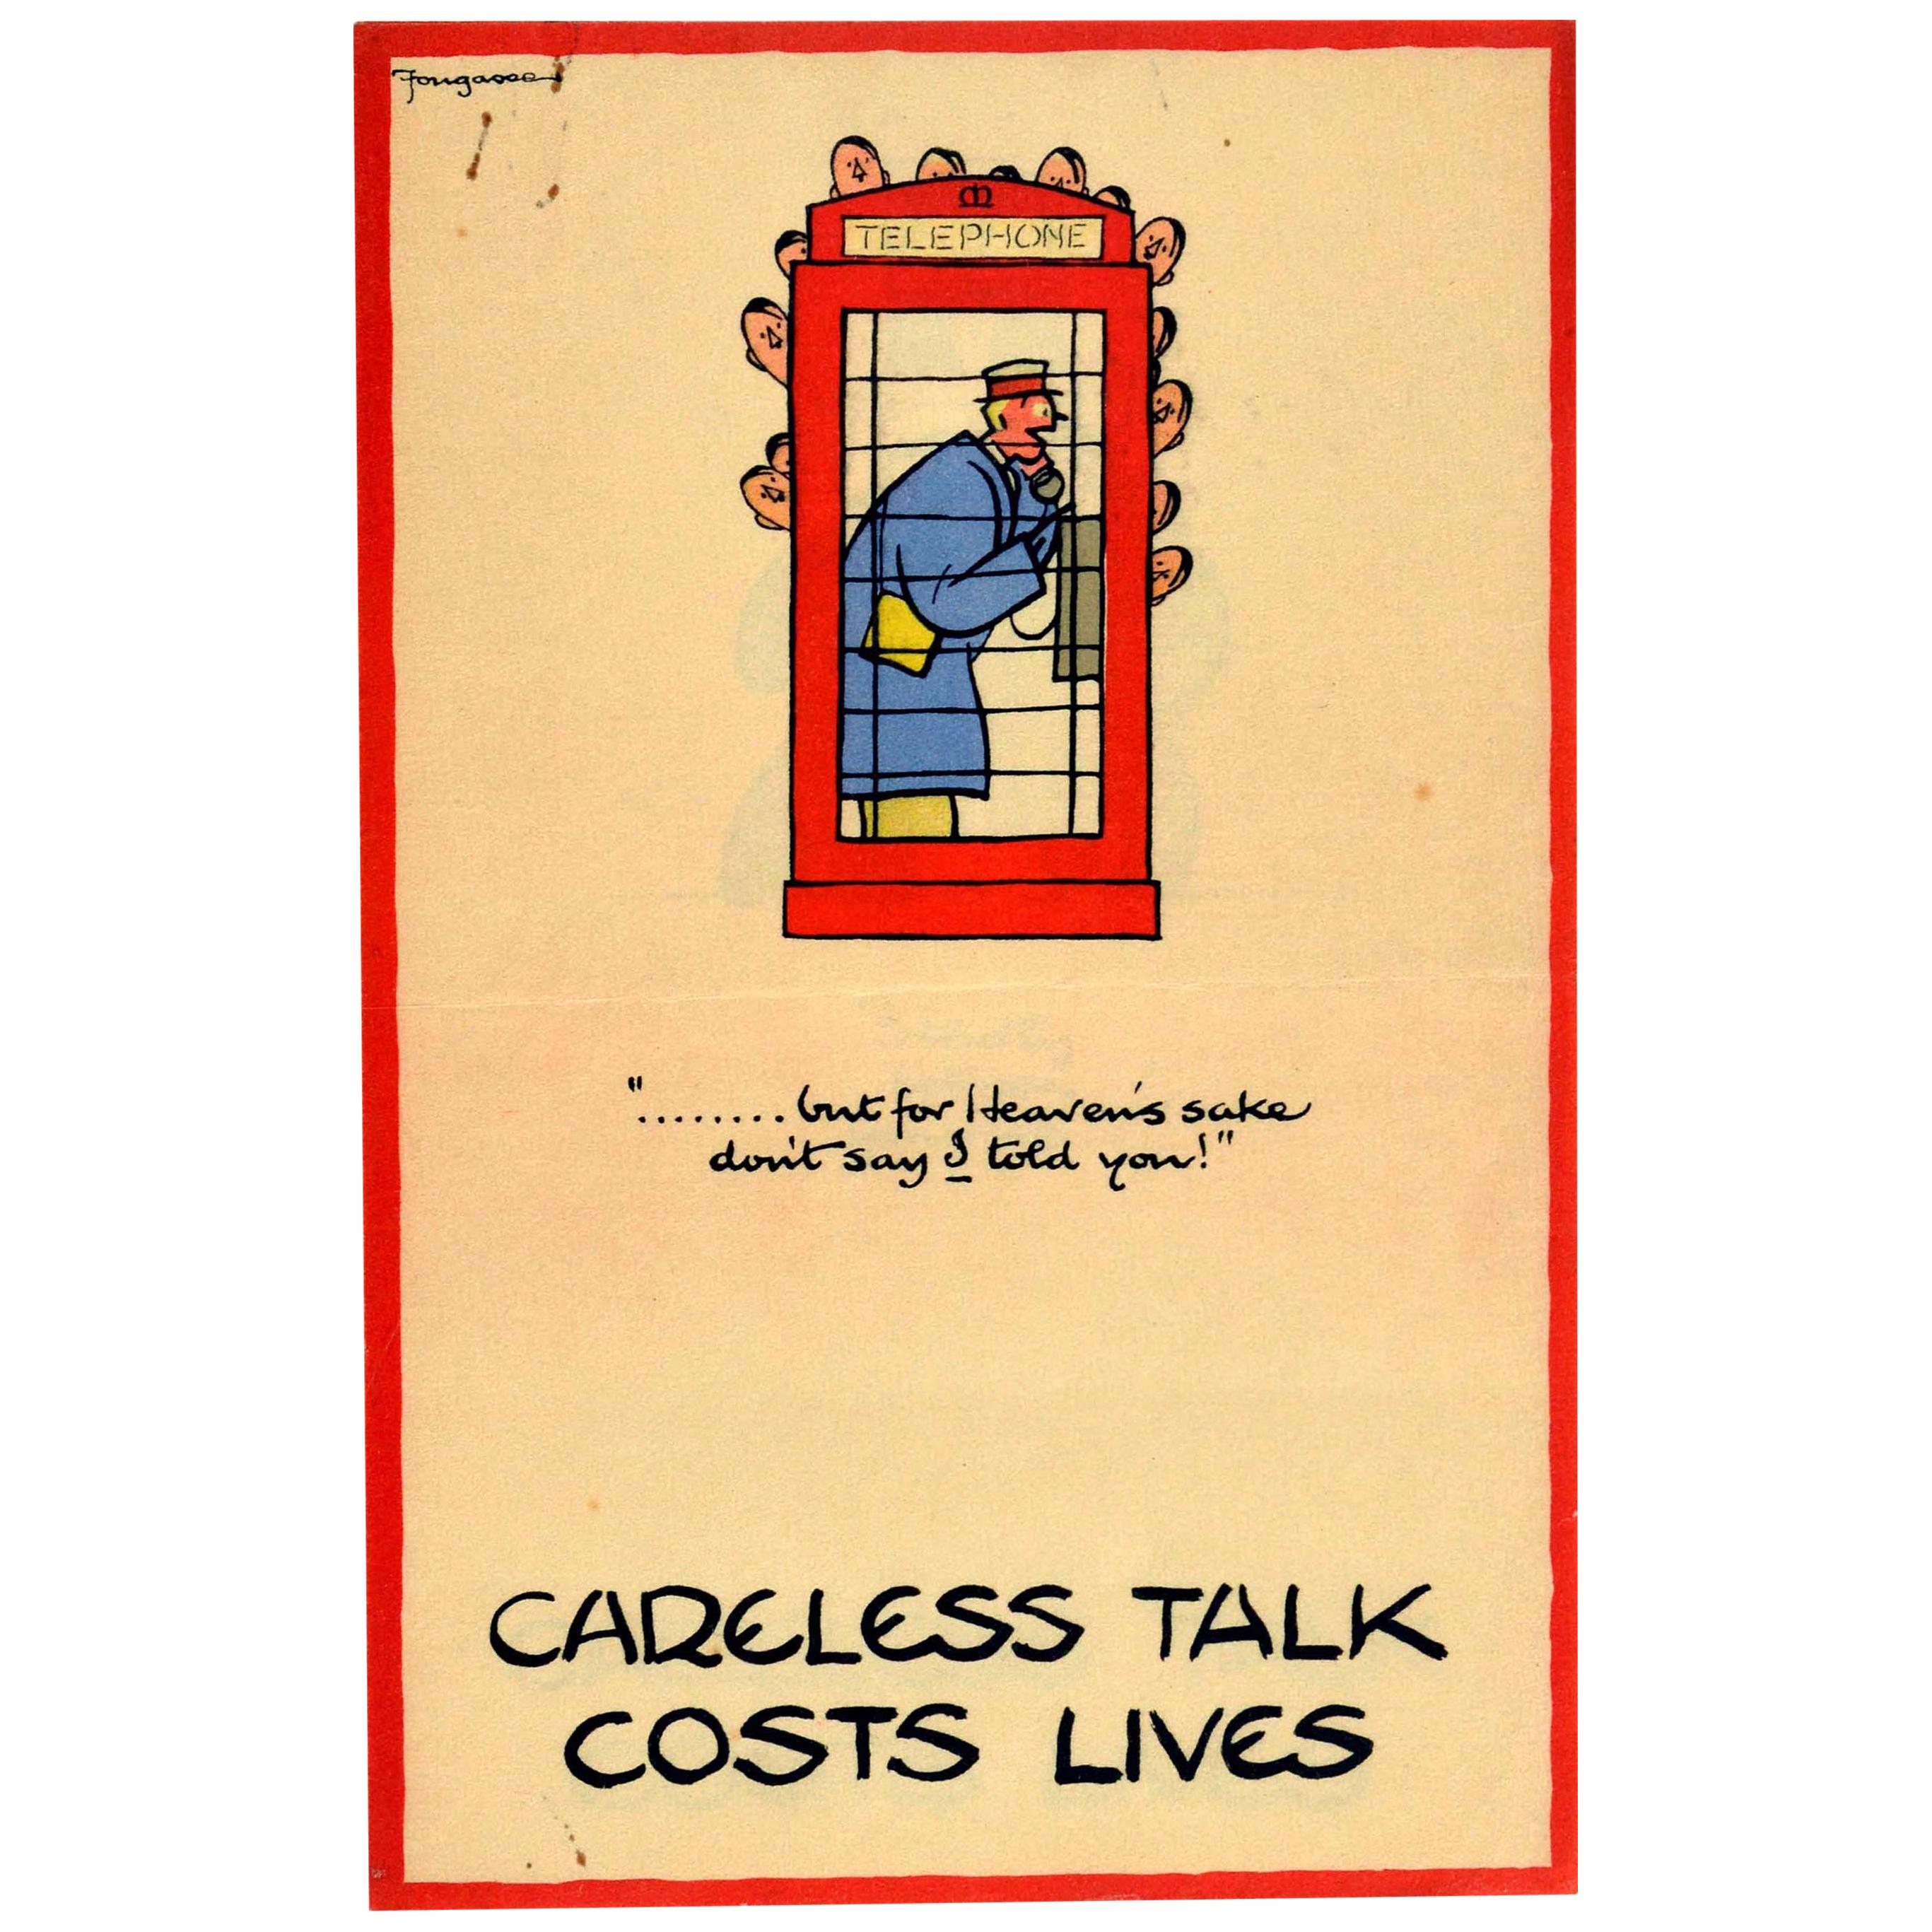 Original Vintage Poster Don't Say I Told You Careless Talk Costs Lives WWII Call